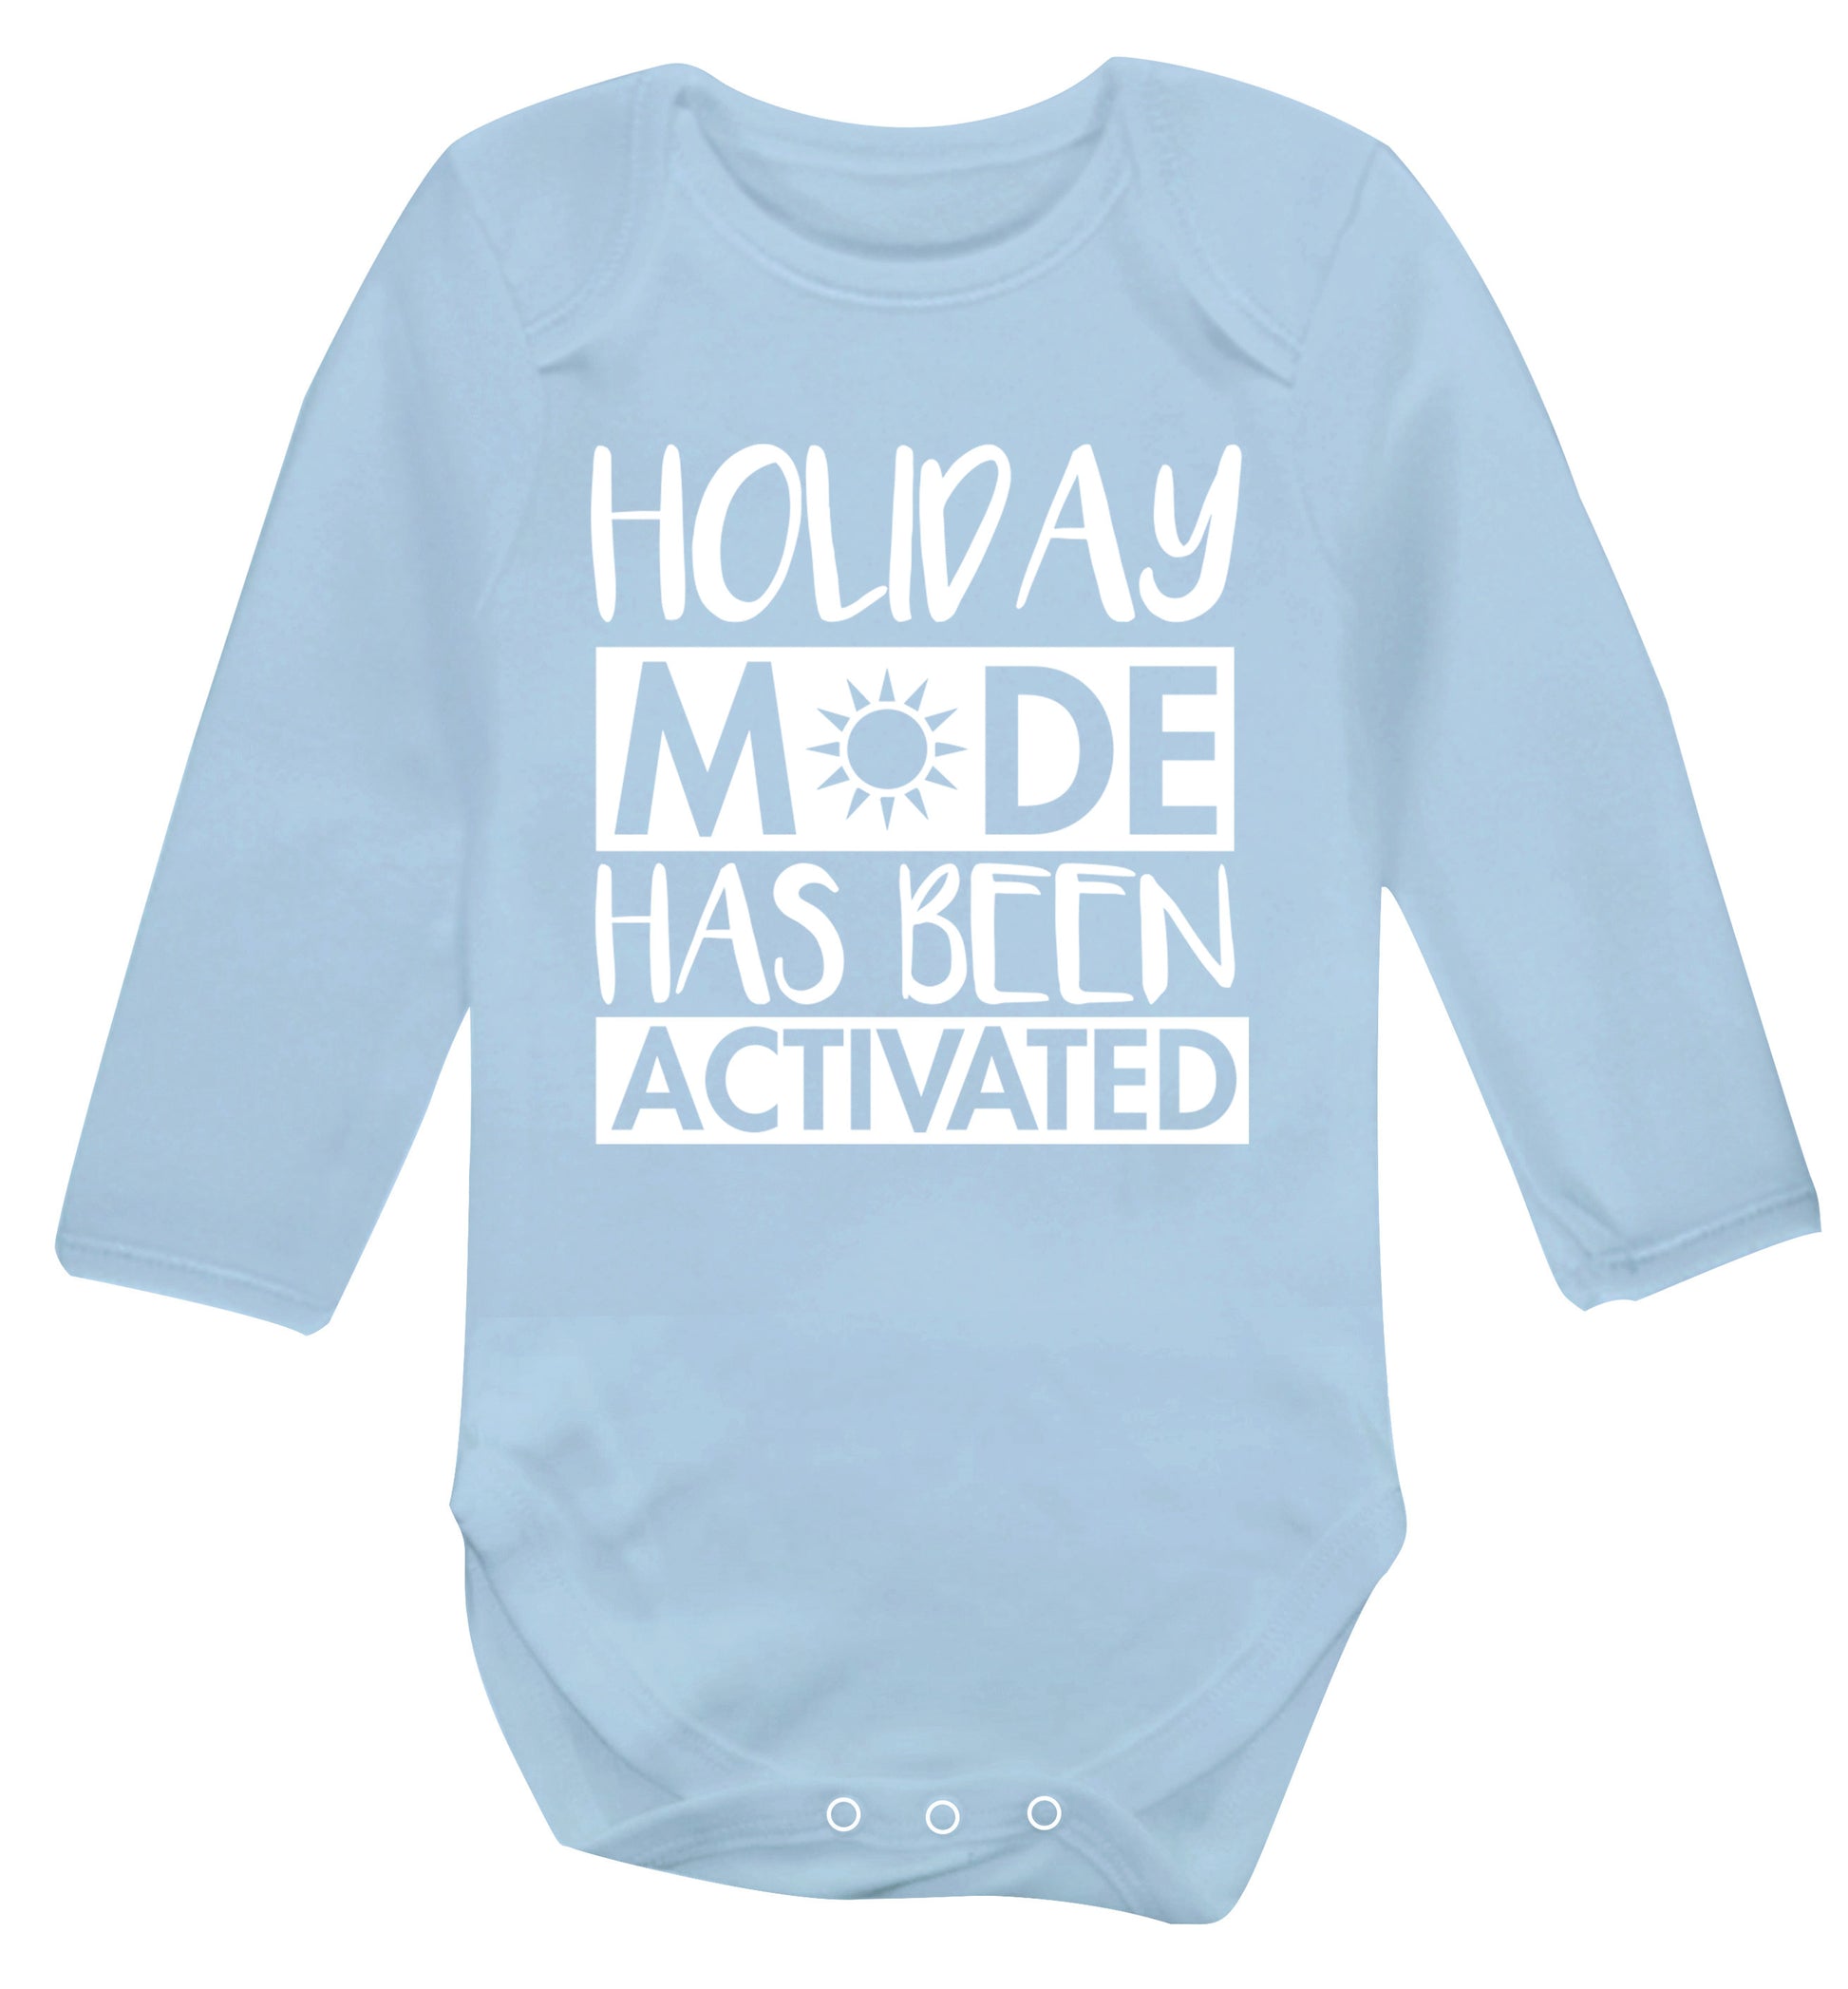 Holiday mode has been activated Baby Vest long sleeved pale blue 6-12 months